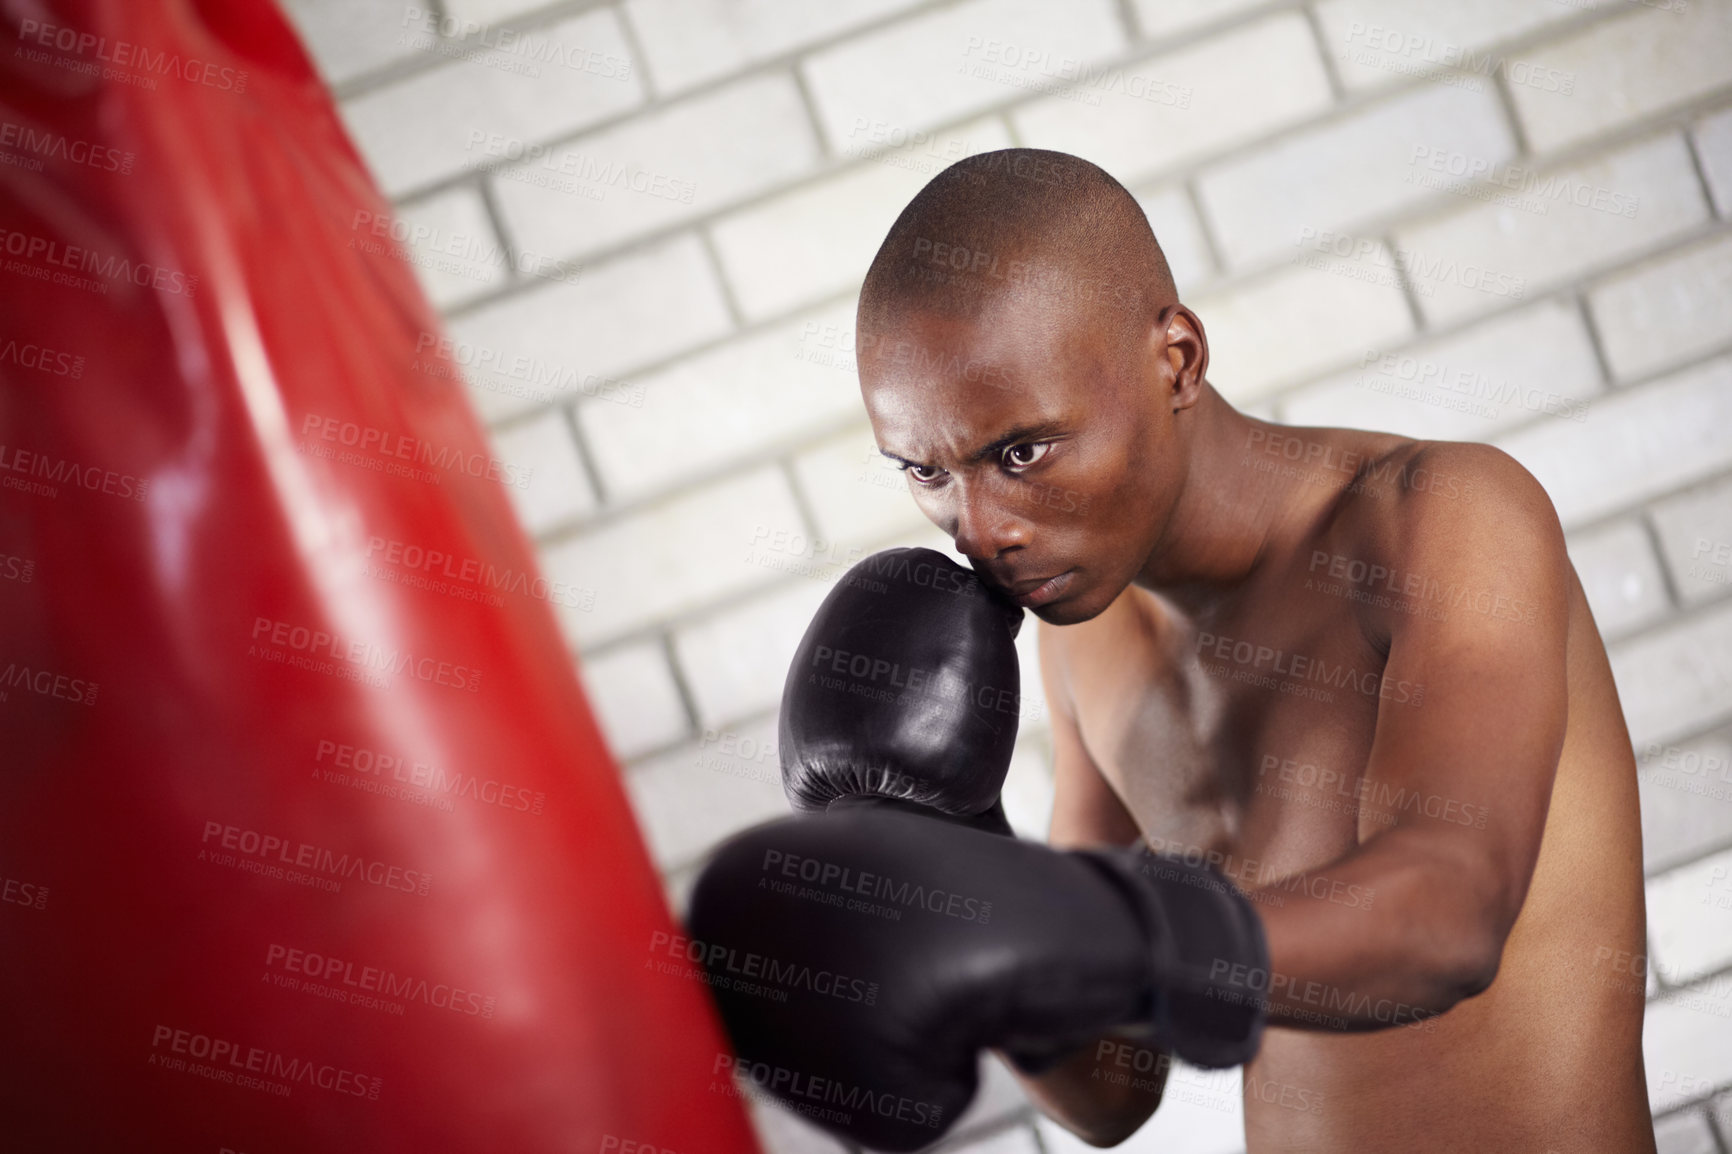 Buy stock photo Fist, punching bag or black man, boxer or sports fighter training for muay thai contest, kickboxing competition or challenge. Impact, power and athlete practice for workout, fitness or boxing fight